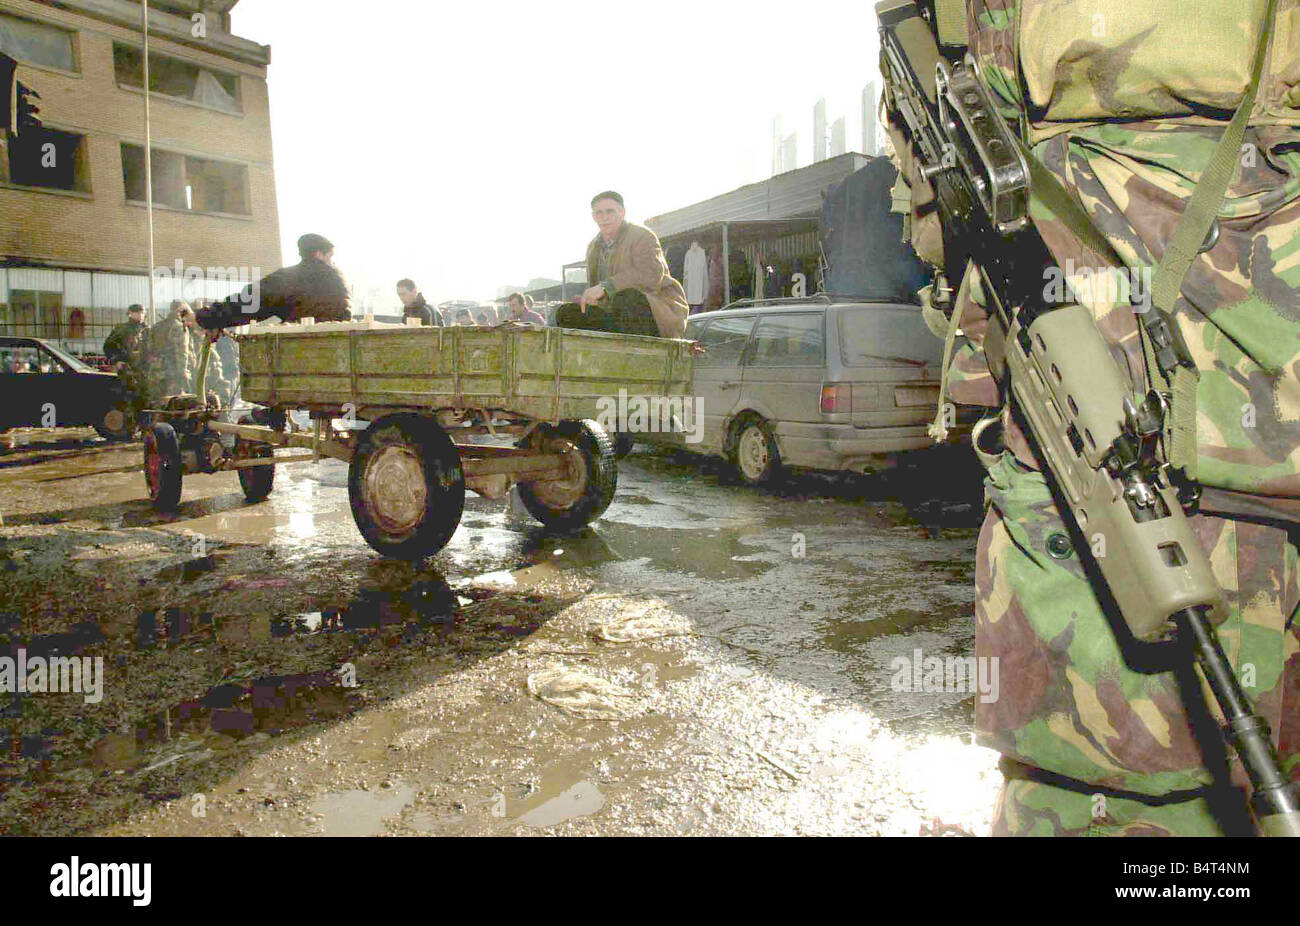 Queens Royal Hussars duty in Kosovo as apart of the KFOR peace keeping mission Traders pass into the market under the watchfull Stock Photo